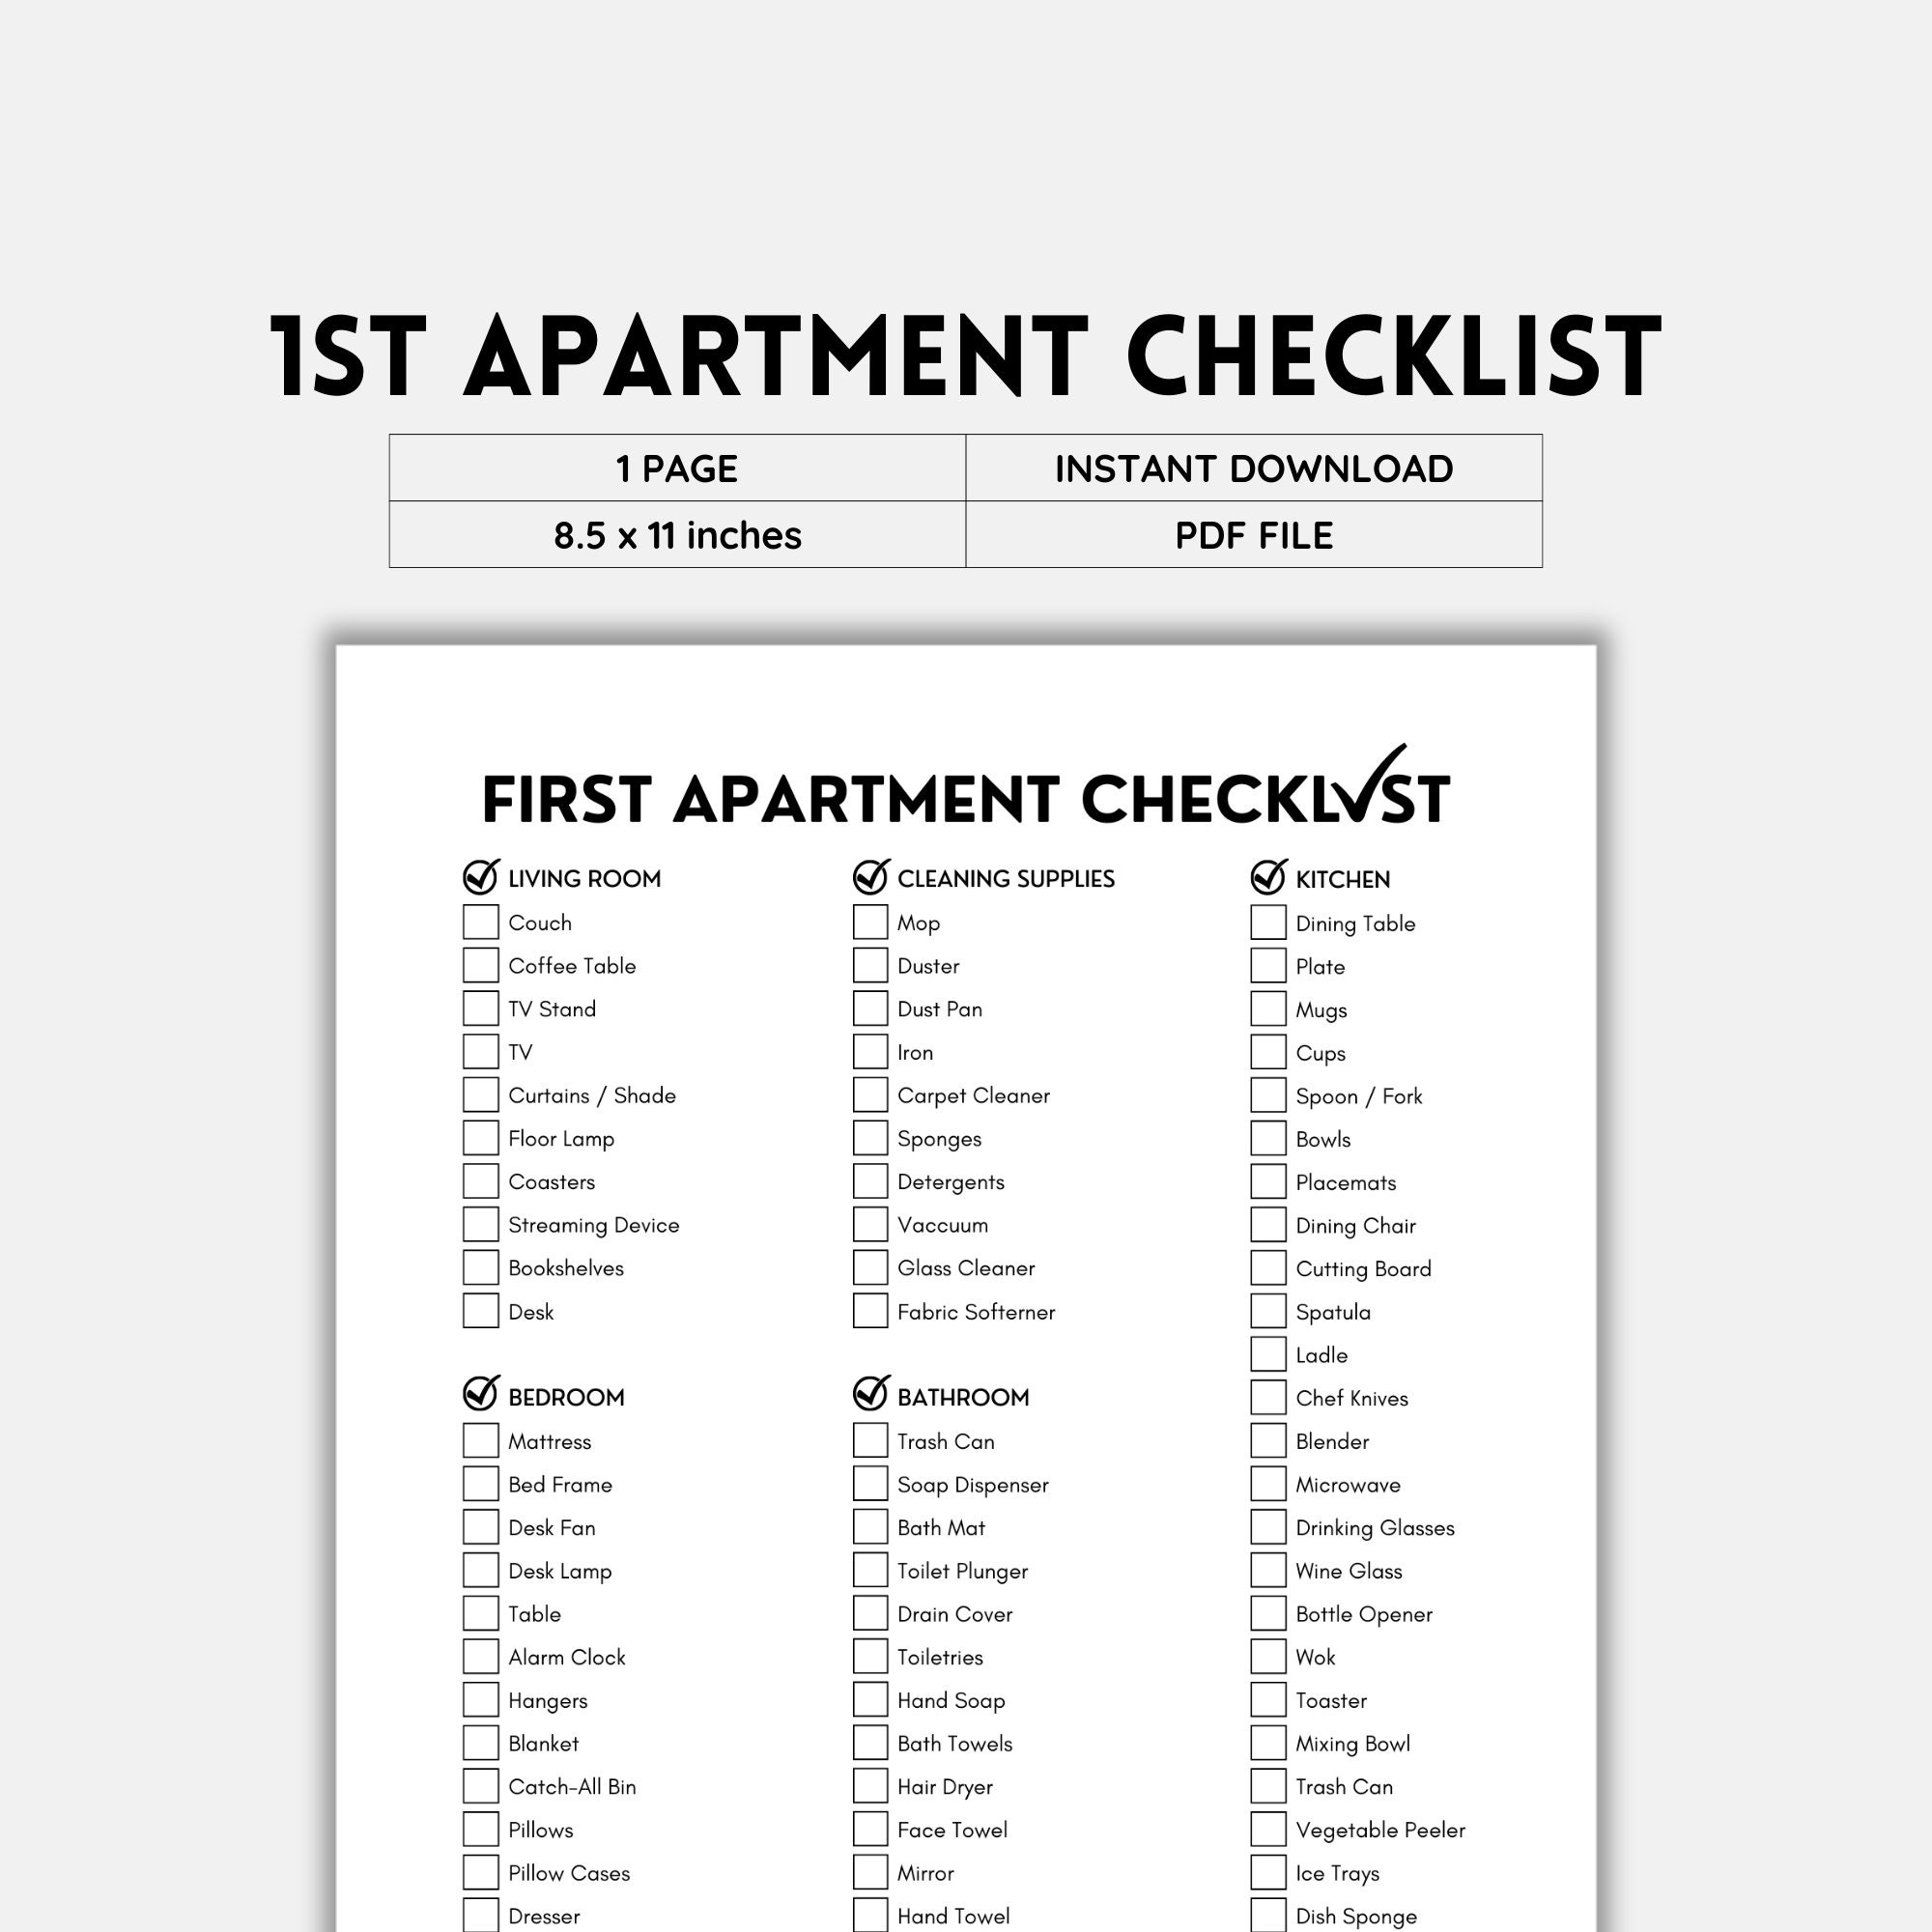 First Apartment Checklist - The Home Depot